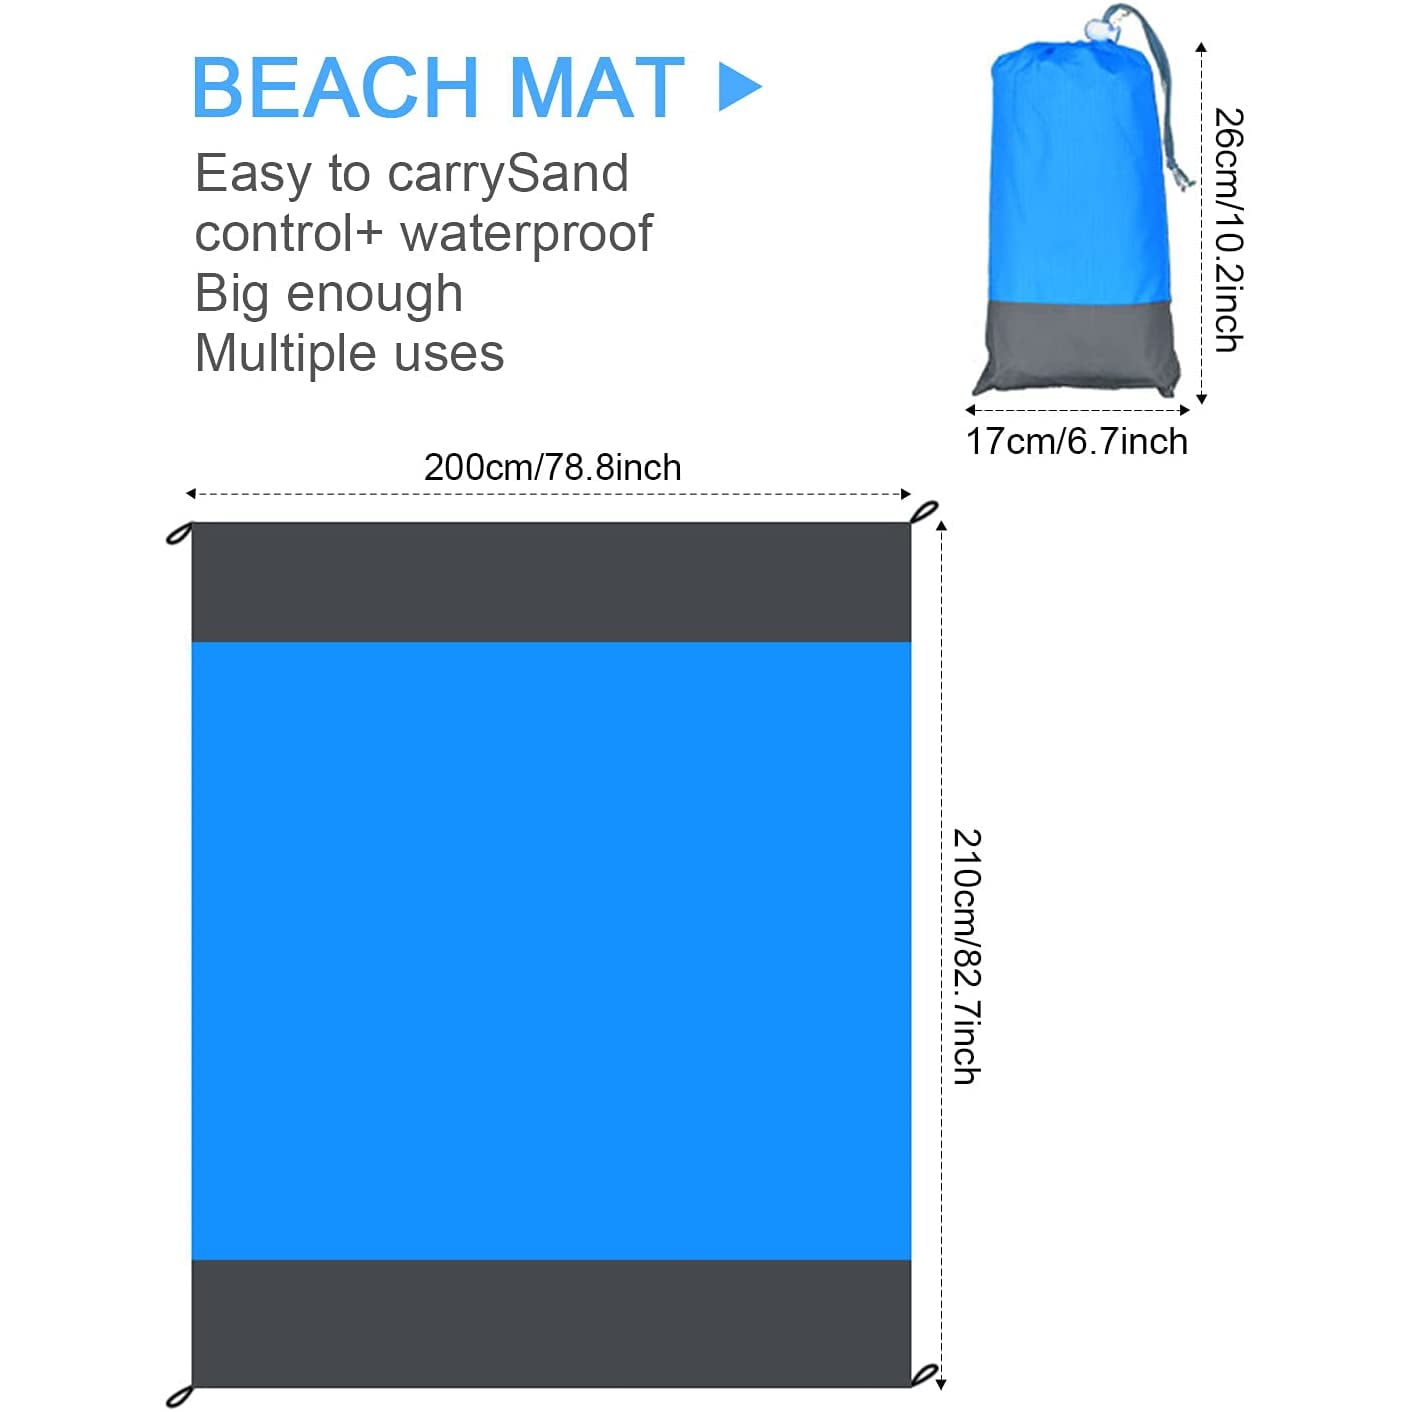 Beach Mat with 4 Fixed Nails Picnic and Grass Travel Park Camping Mat for Beach Hiking Oversize 210 x 200cm Waterproof Sandproof Picnic Blanket with pocket Megade Beach Blanket Picnic Blanket 